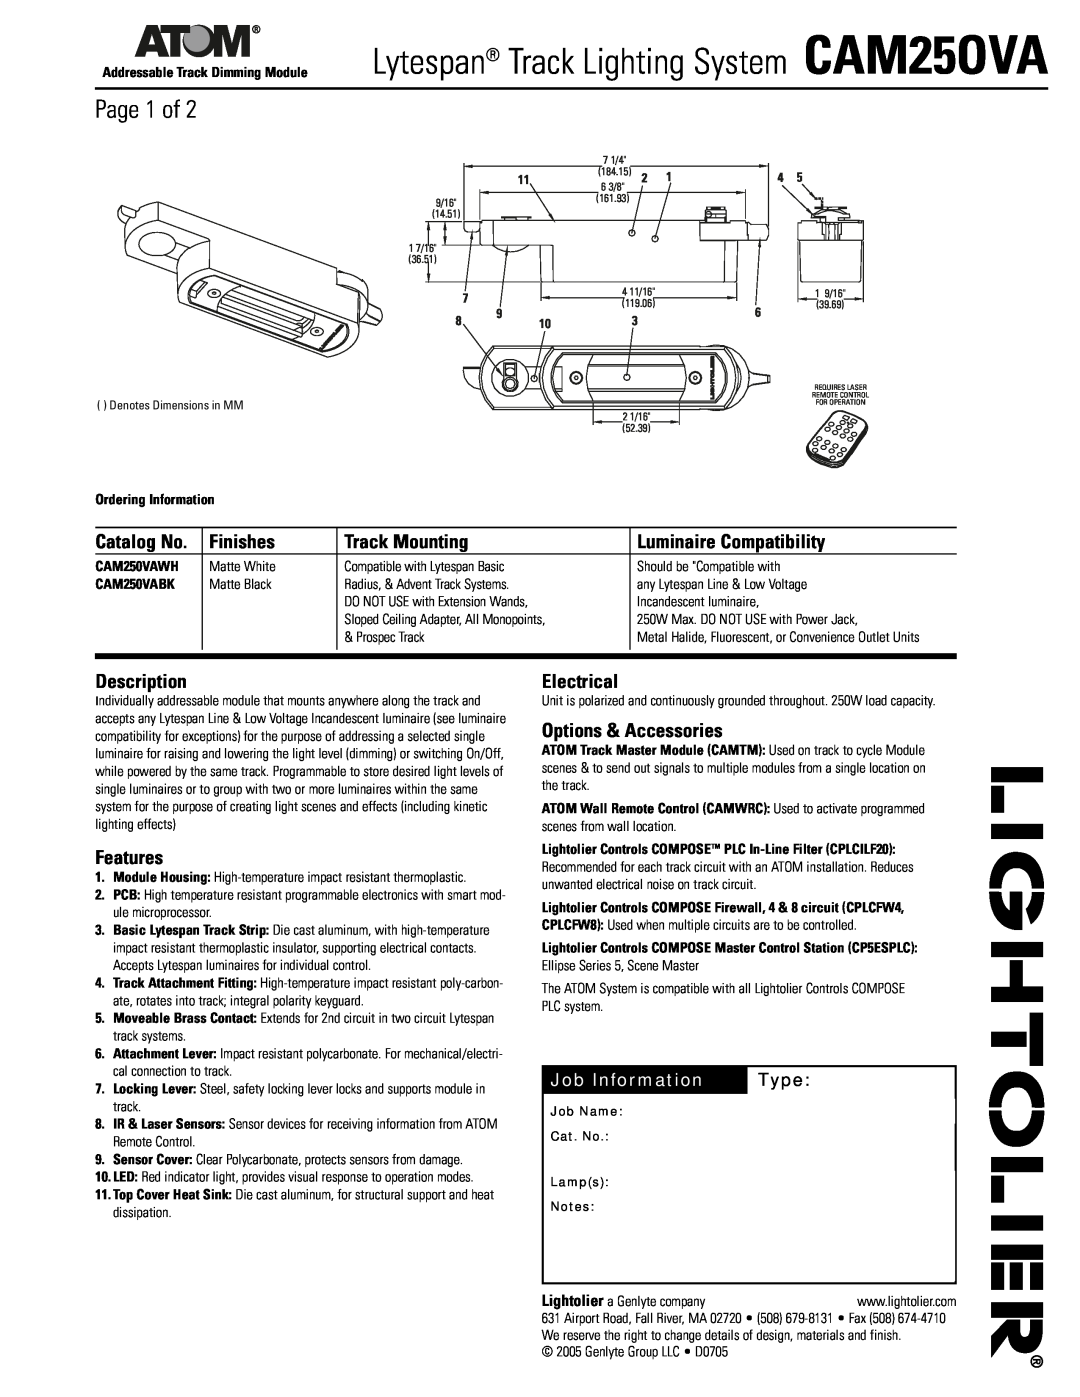 Lightolier CAM25OVA dimensions Page 1 of, Finishes, Track Mounting, Luminaire Compatibility, Description, Features, Type 